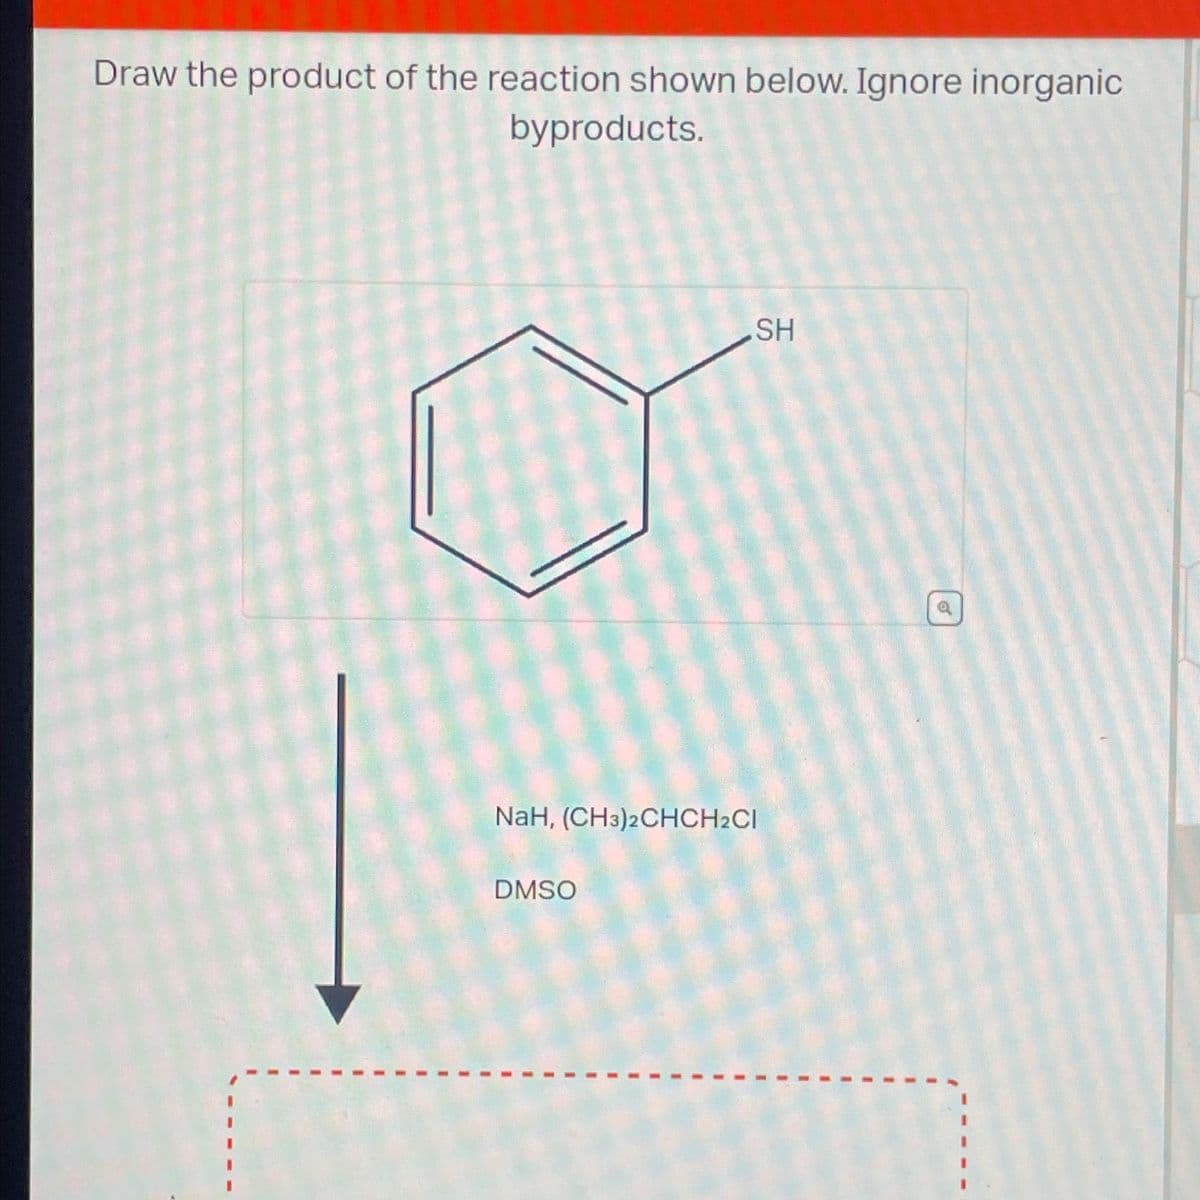 Draw the product of the reaction shown below. Ignore inorganic
byproducts.
SH
NaH, (CH3)2CHCH2CI
DMSO